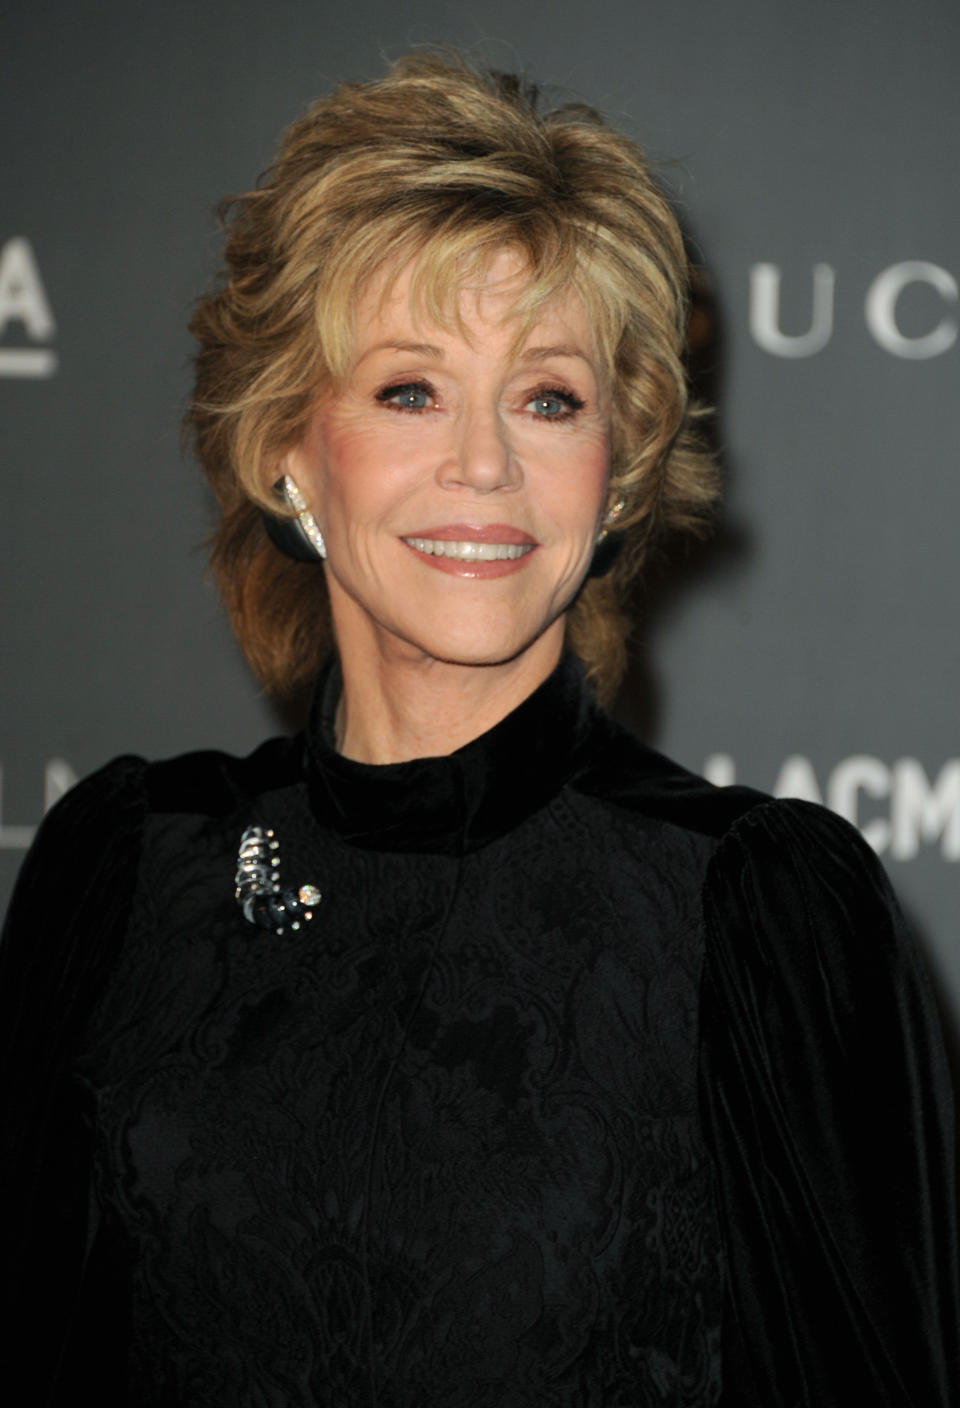 "At 74, I have never had such a fulfilling sex life," <a href="http://www.huffingtonpost.com/2012/07/10/jane-fonda-sex-life_n_1661999.html">Fonda told Hello! magazine</a>. "The only thing I have never known is true intimacy with a man. I absolutely wanted to discover that before dying. It has happened with Richard, I feel totally secure with him. Often, when we make love, I see him as he was 30 years ago."